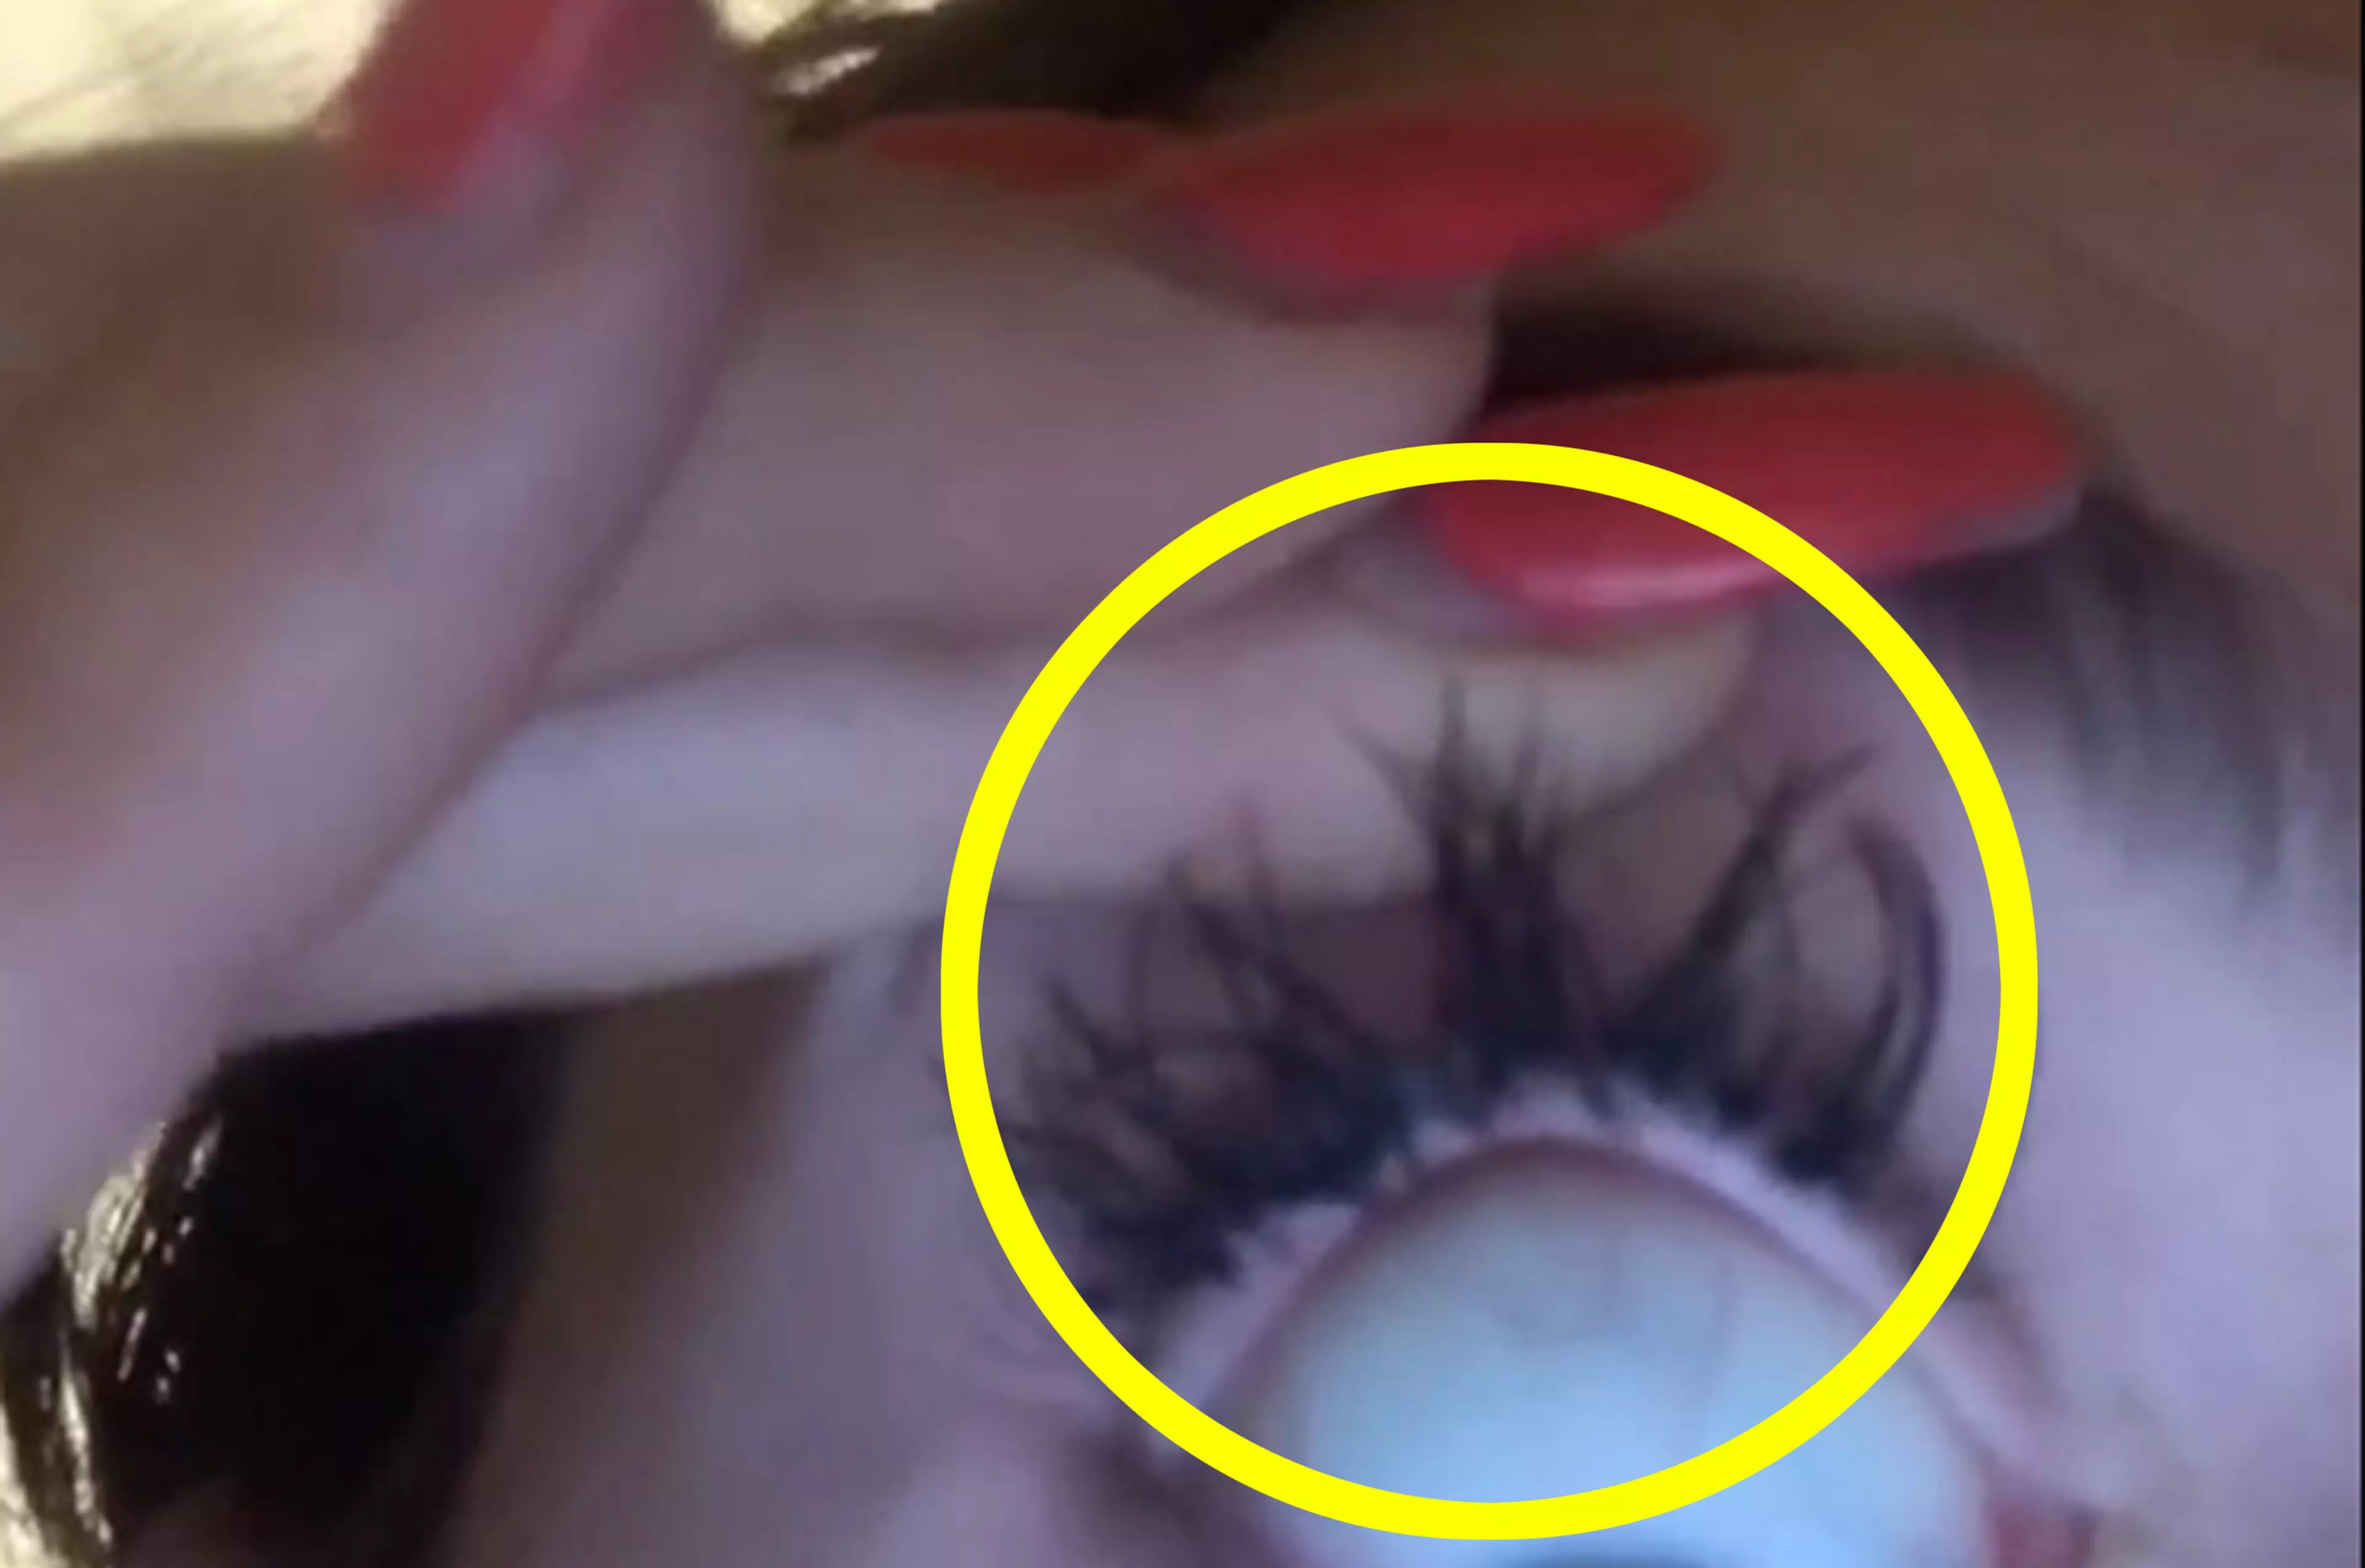 When she got home, Lainey realised the lashes were glued to her waterline (